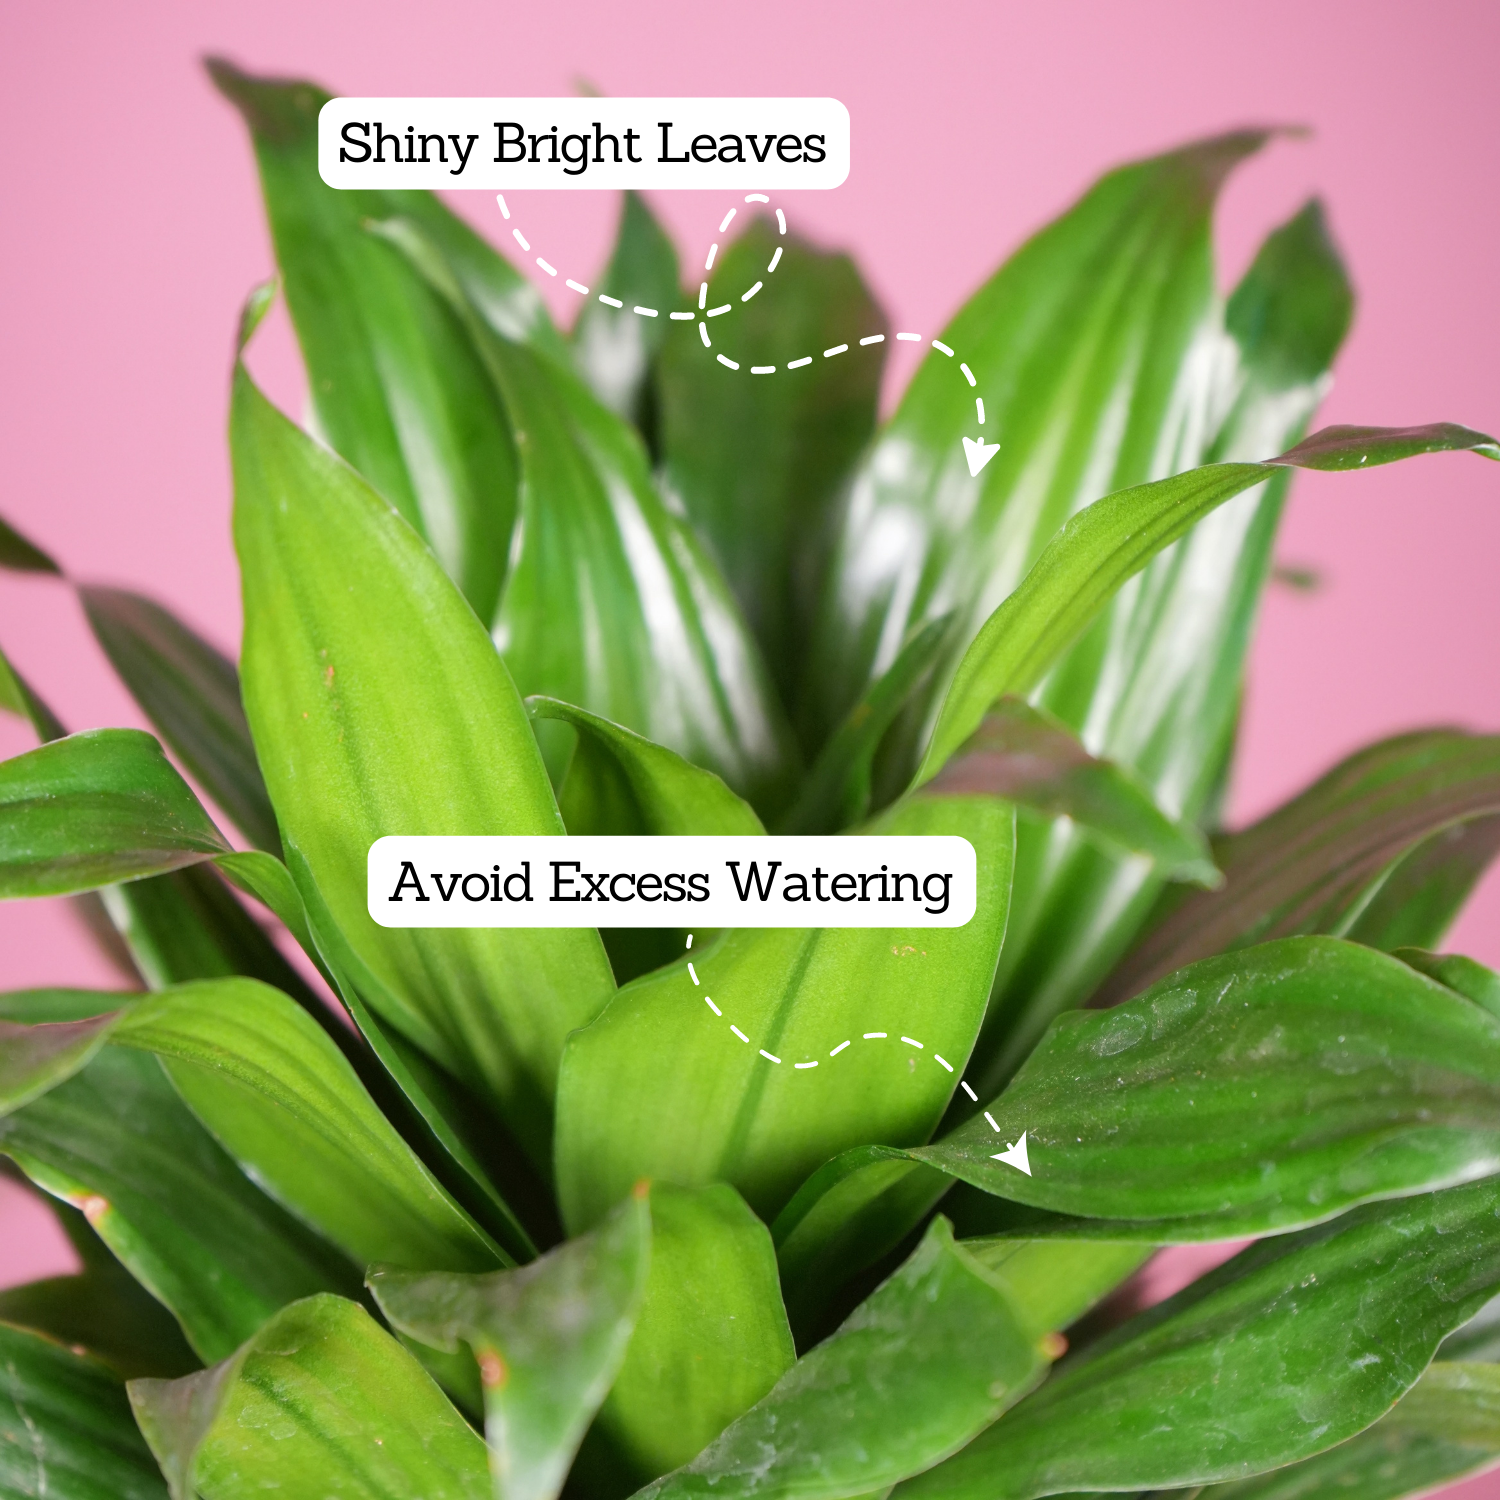 Dracaena Compacta - Live Plant (With Self-Watering Pot & Plant)